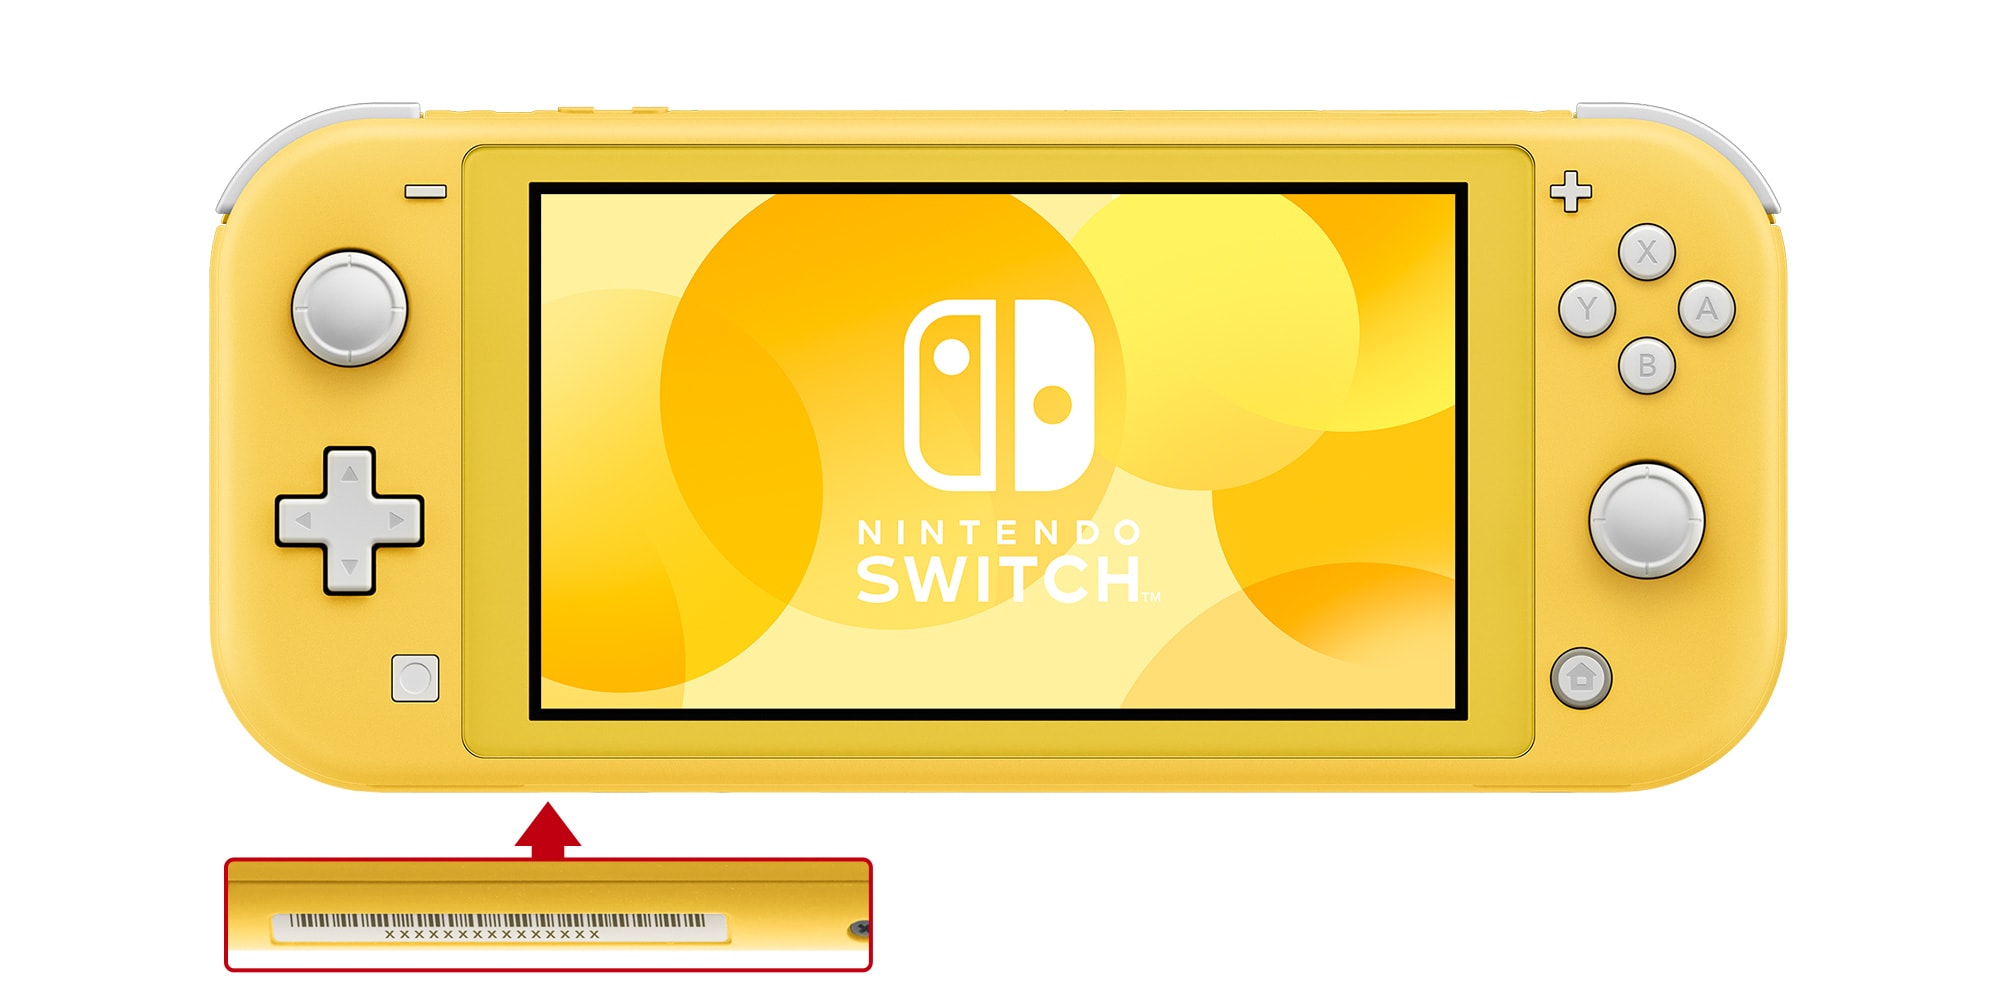 How to Find the Serial Number on Nintendo Switch - Image 5